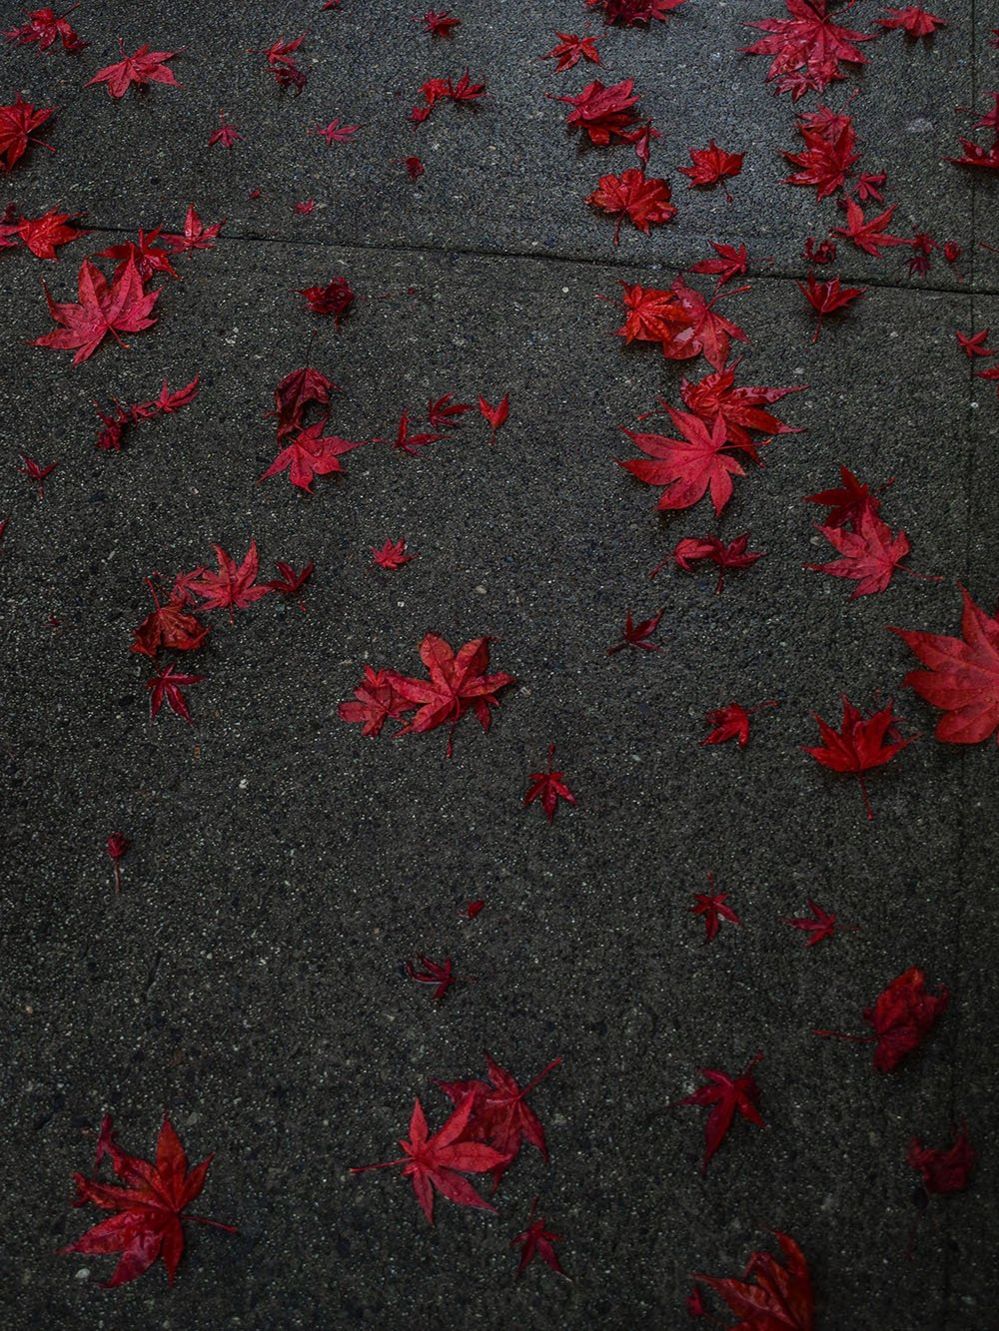 Red maple leaves on a path